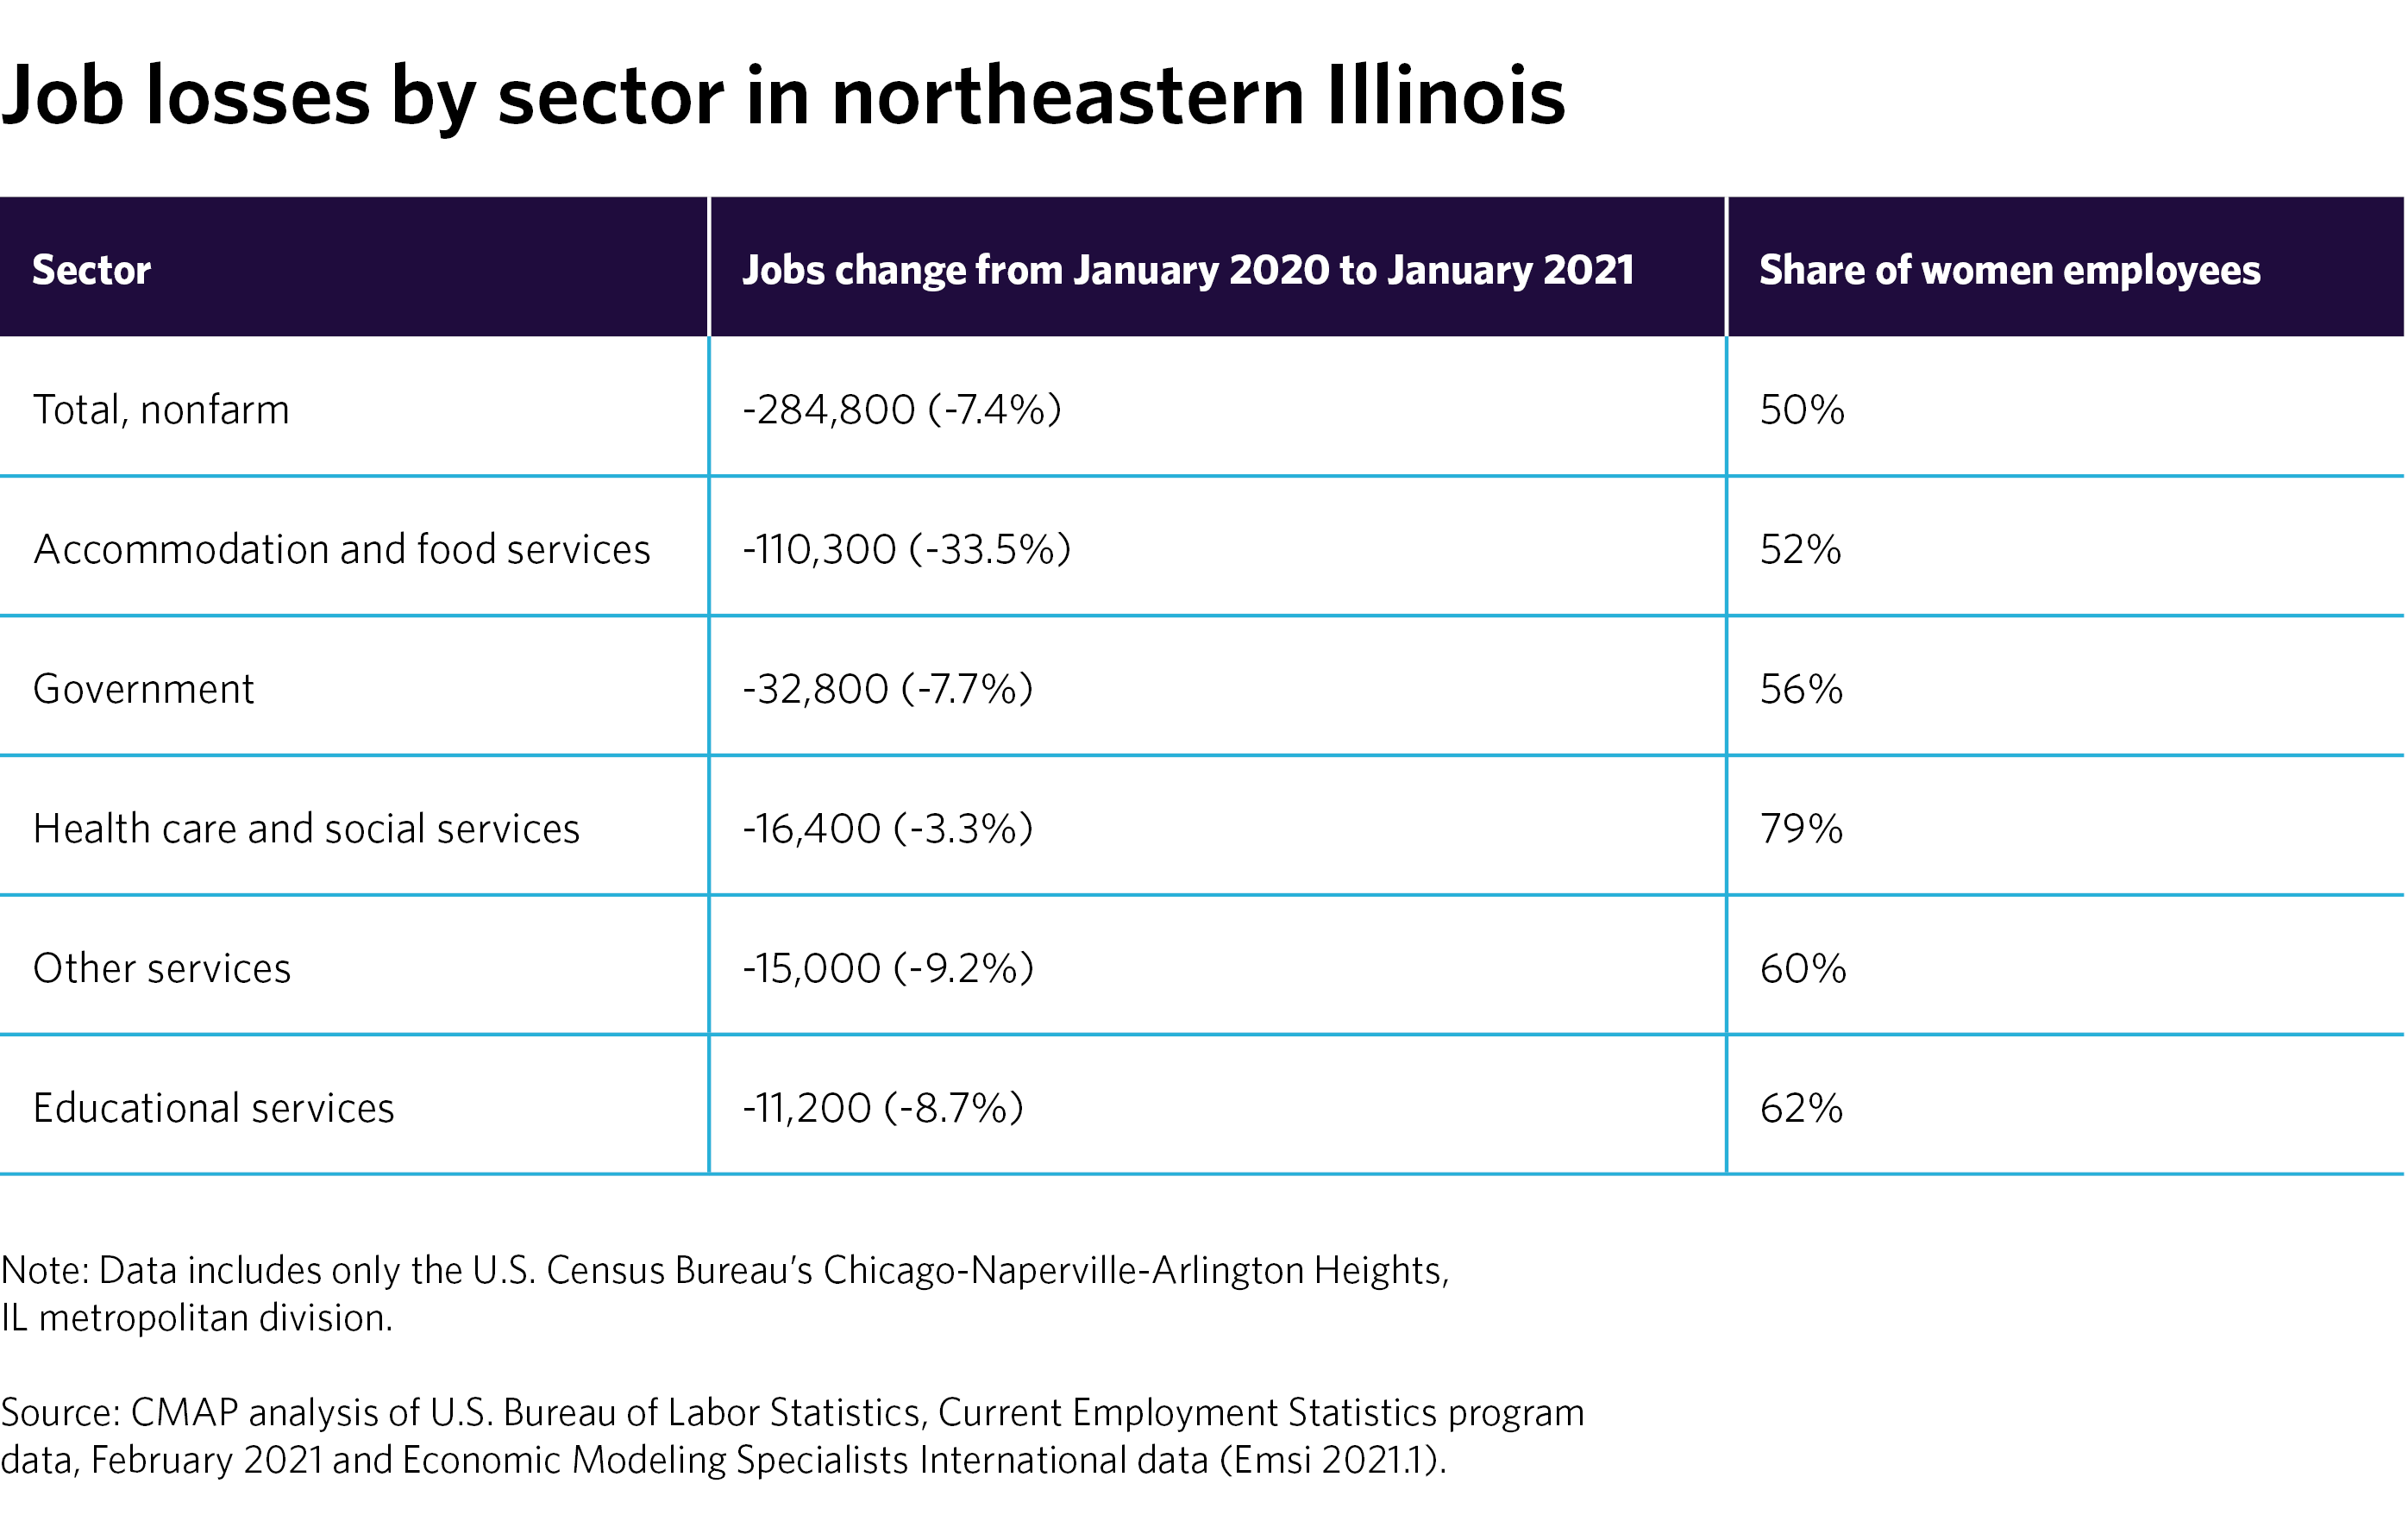 Job losses by sector in northeastern Illinois chart